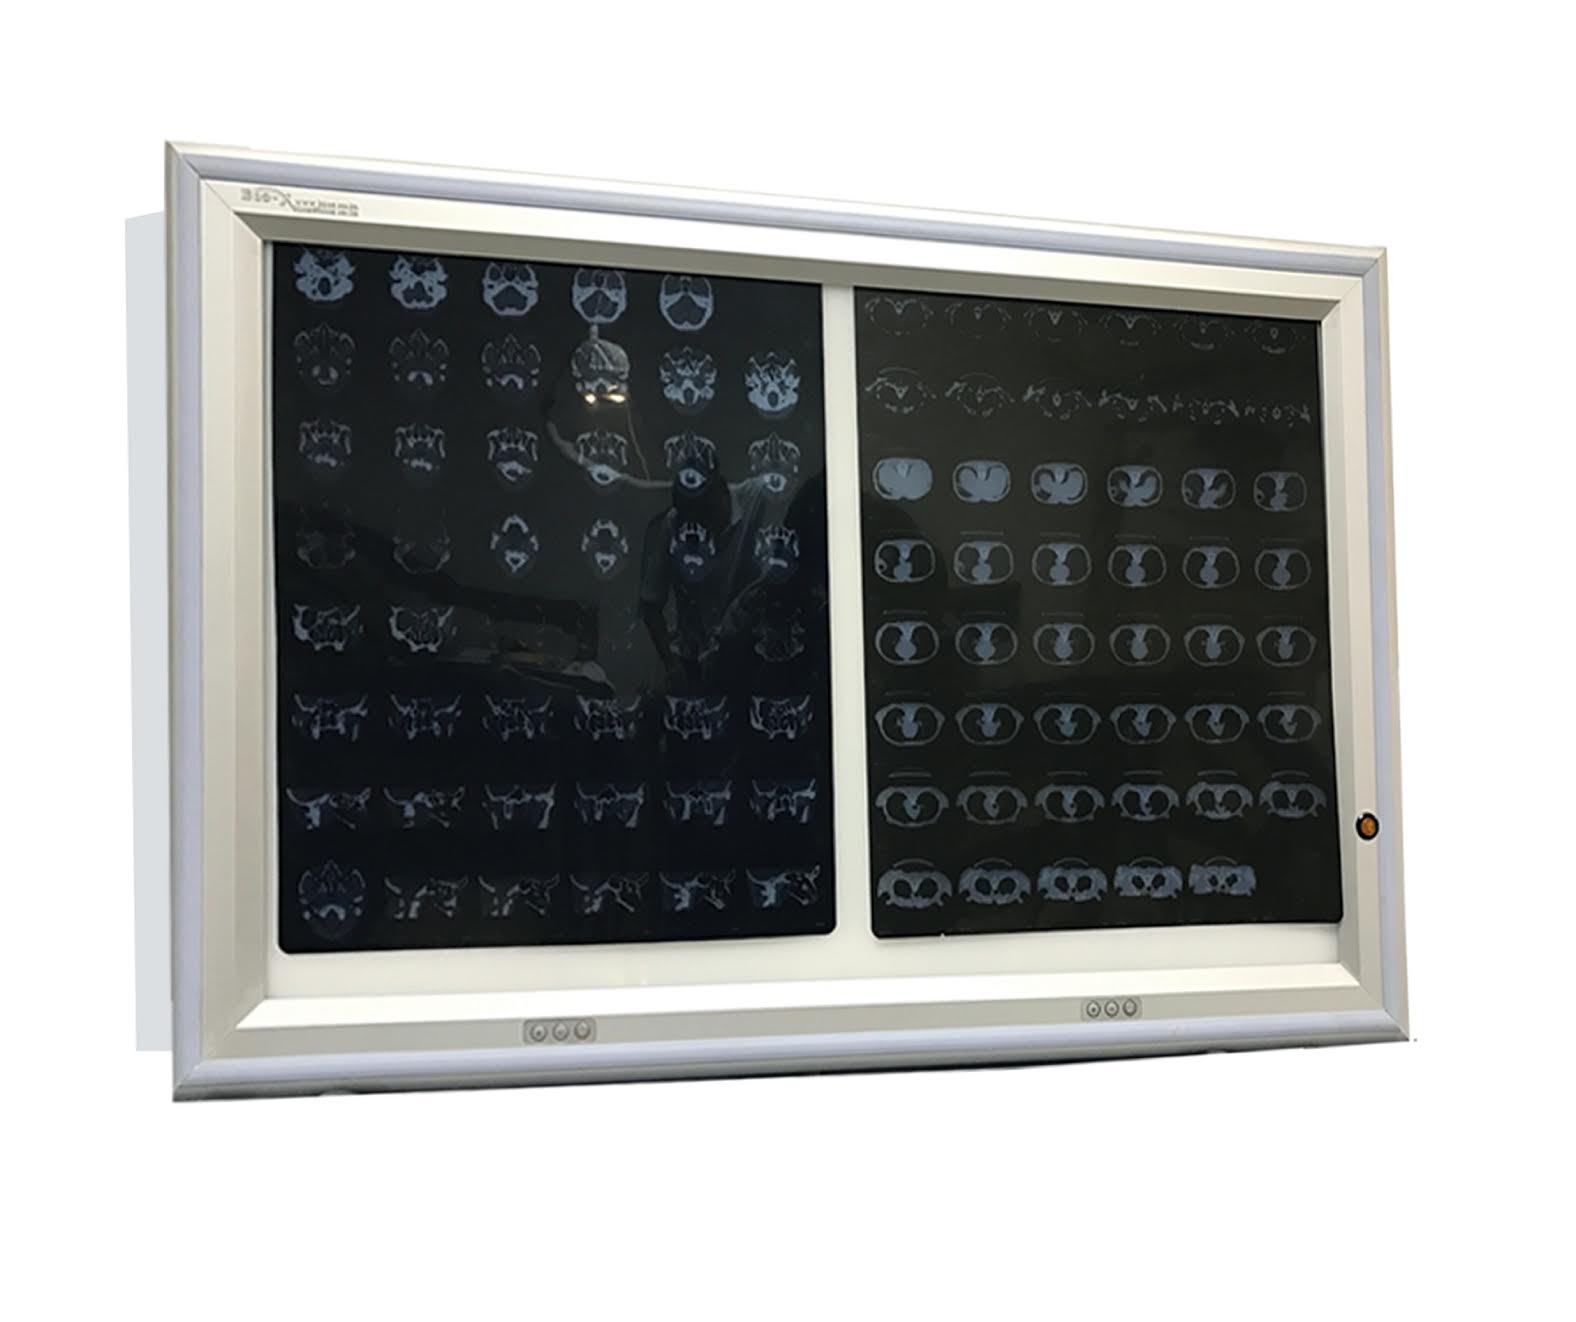 X ray viewer